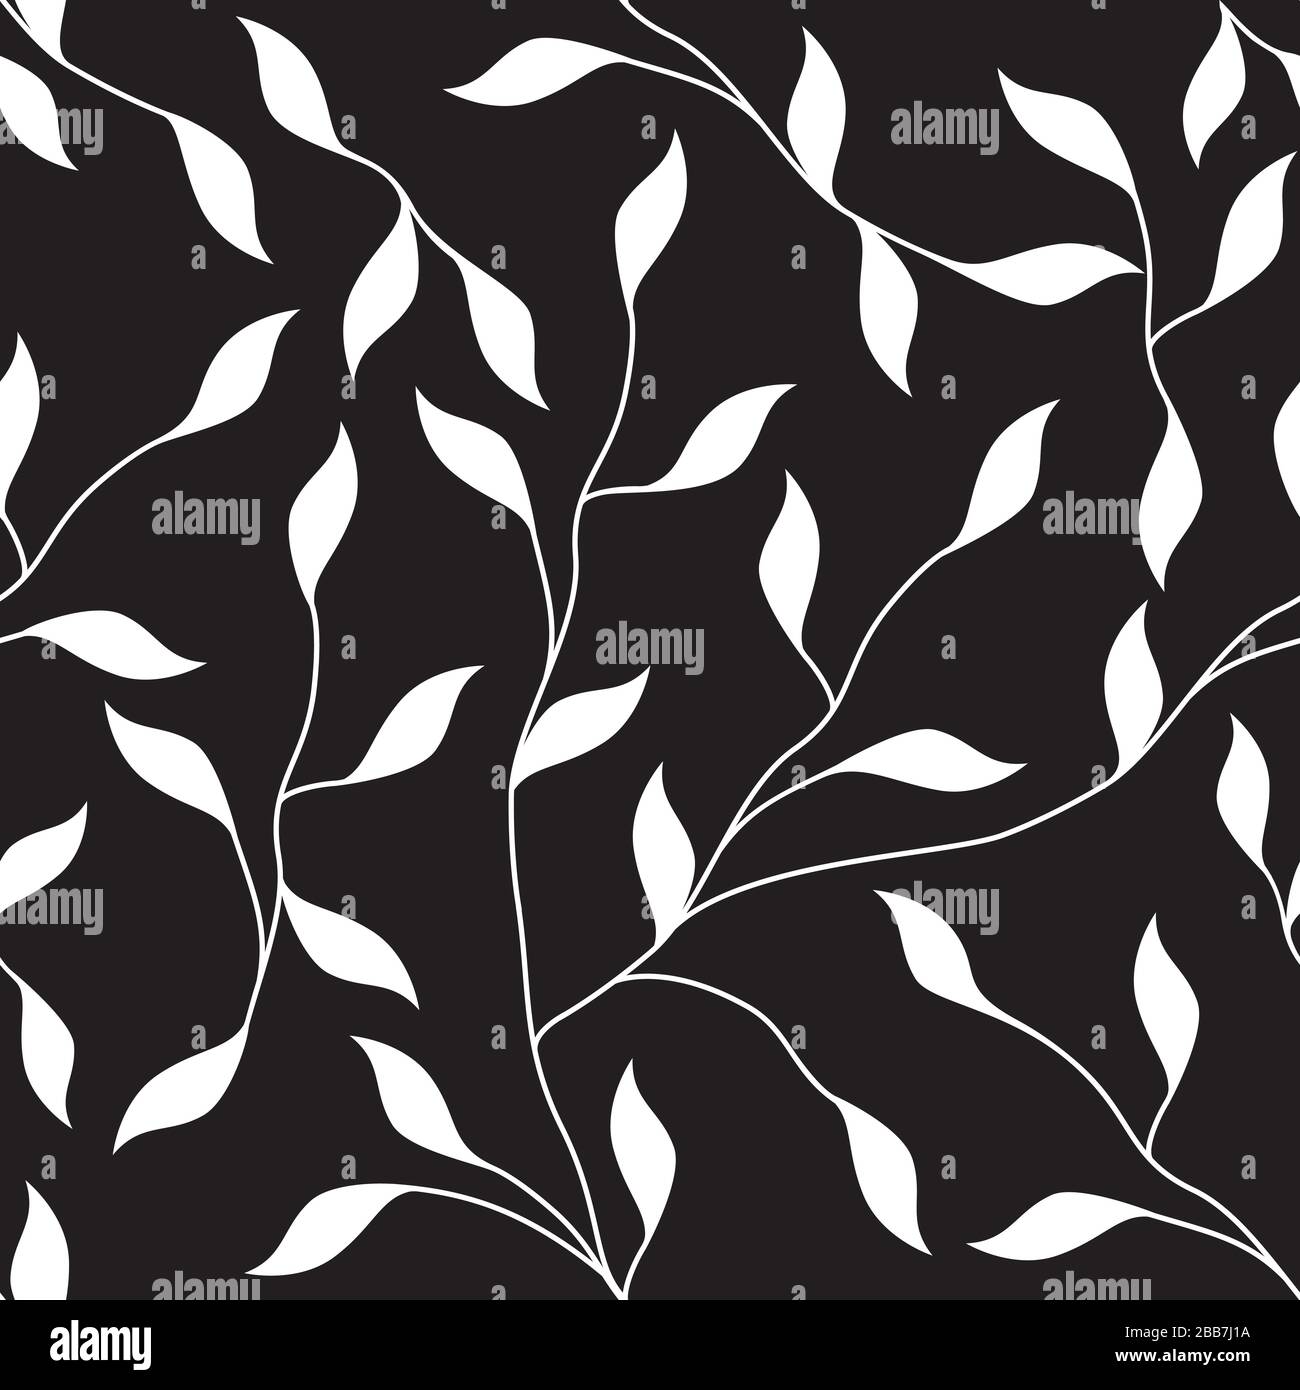 Black and White Leaves and Vines Seamless Repeating Vector Pattern Stock Vector